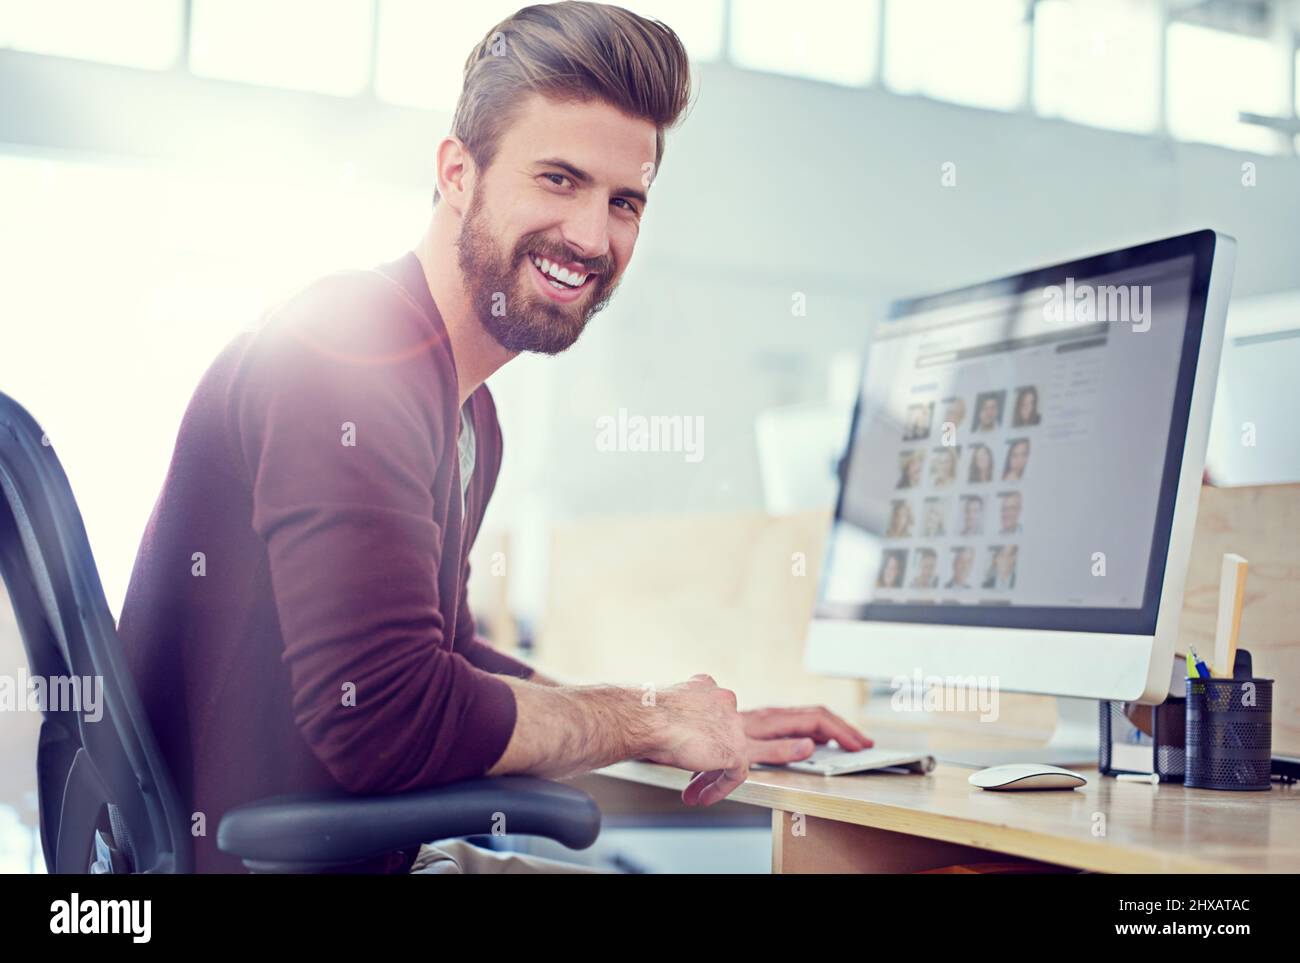 His designs are exemplary. Shot of a designer at work in an office. Stock Photo